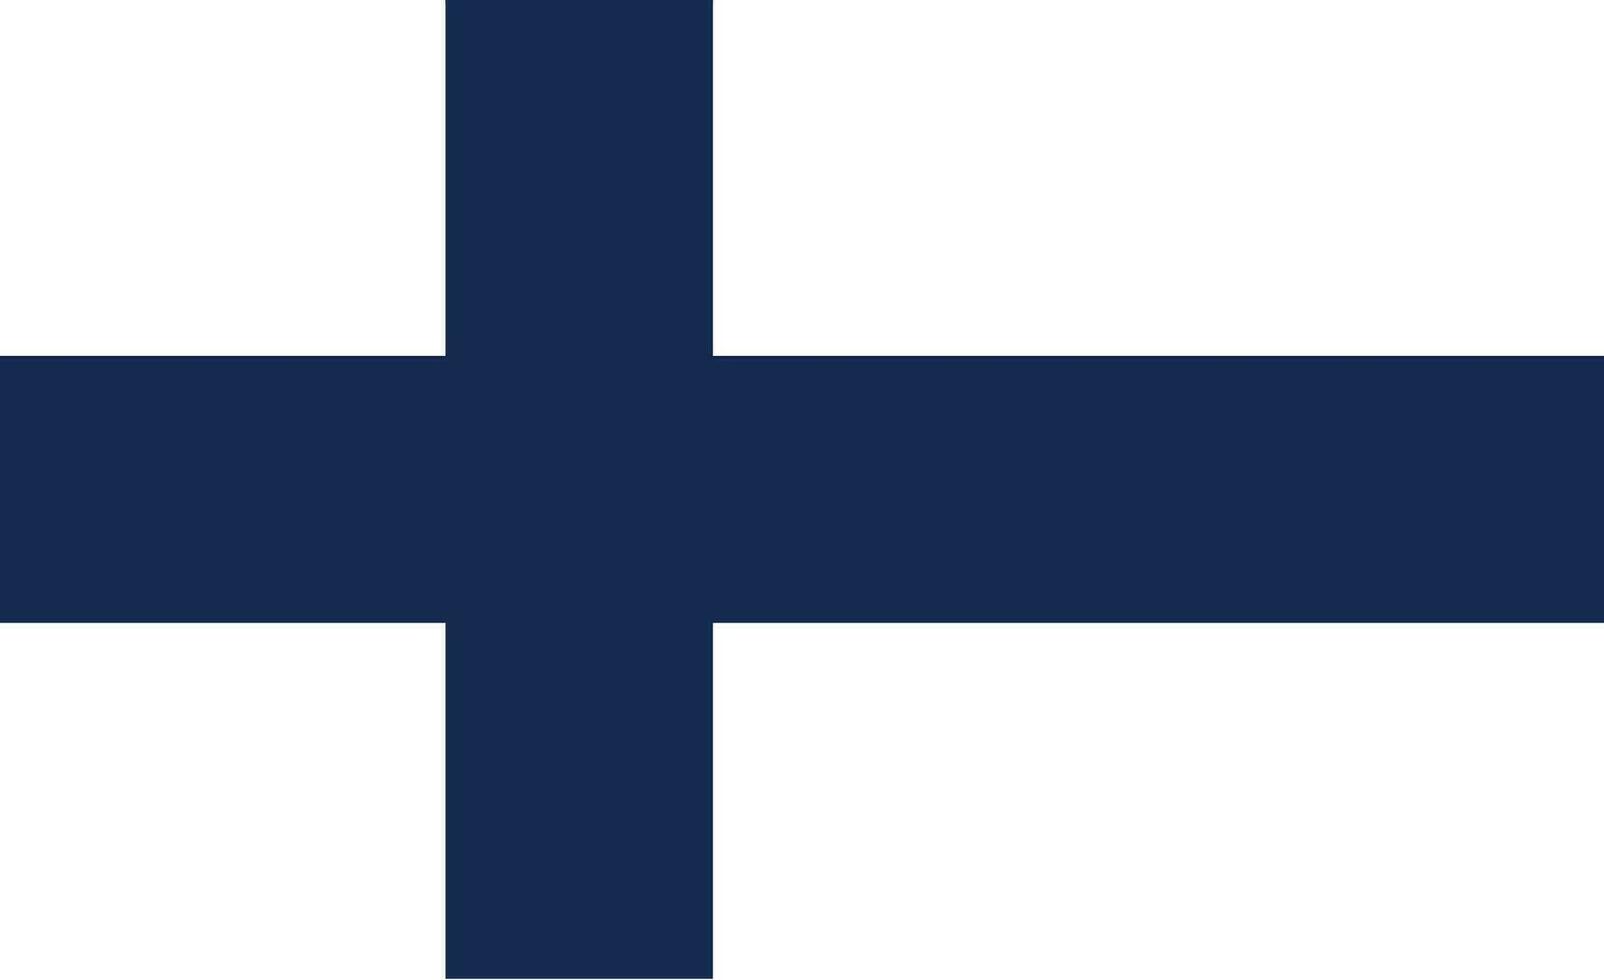 Finland flag vector illustration with official colors and accurate proportion